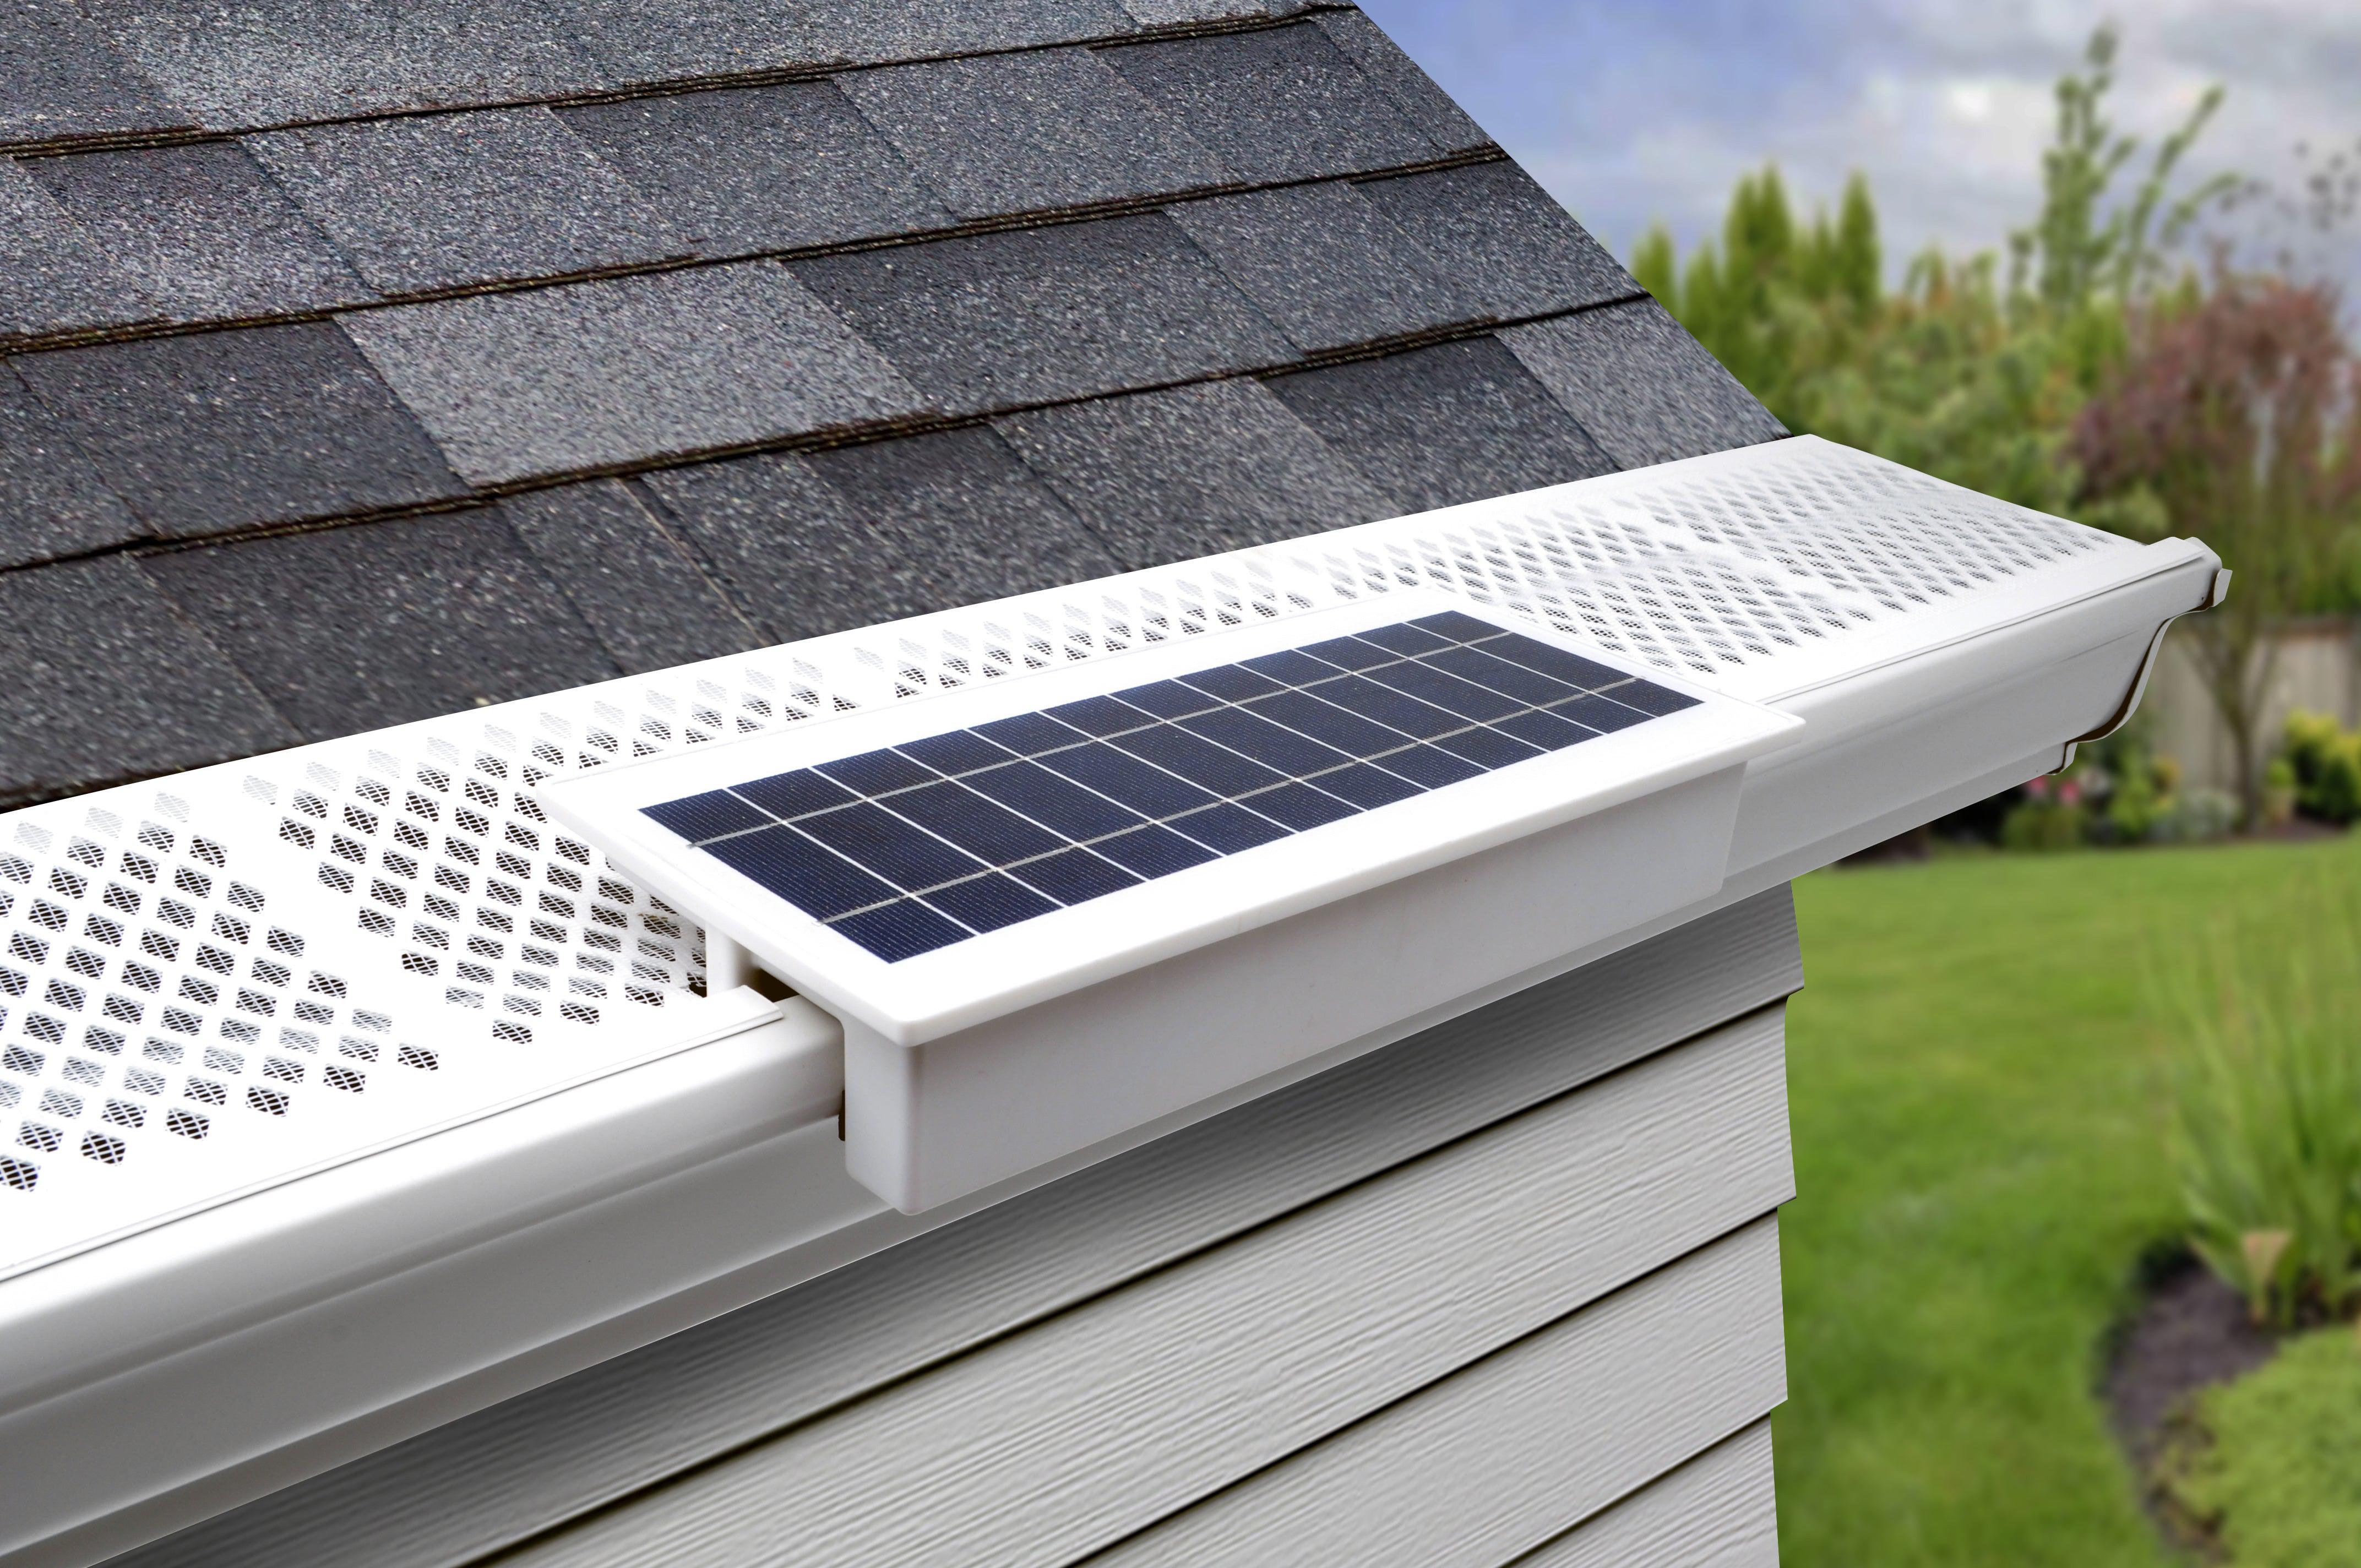 EZ Home Security FloodLight mounted on a white gutter with gutter guard.